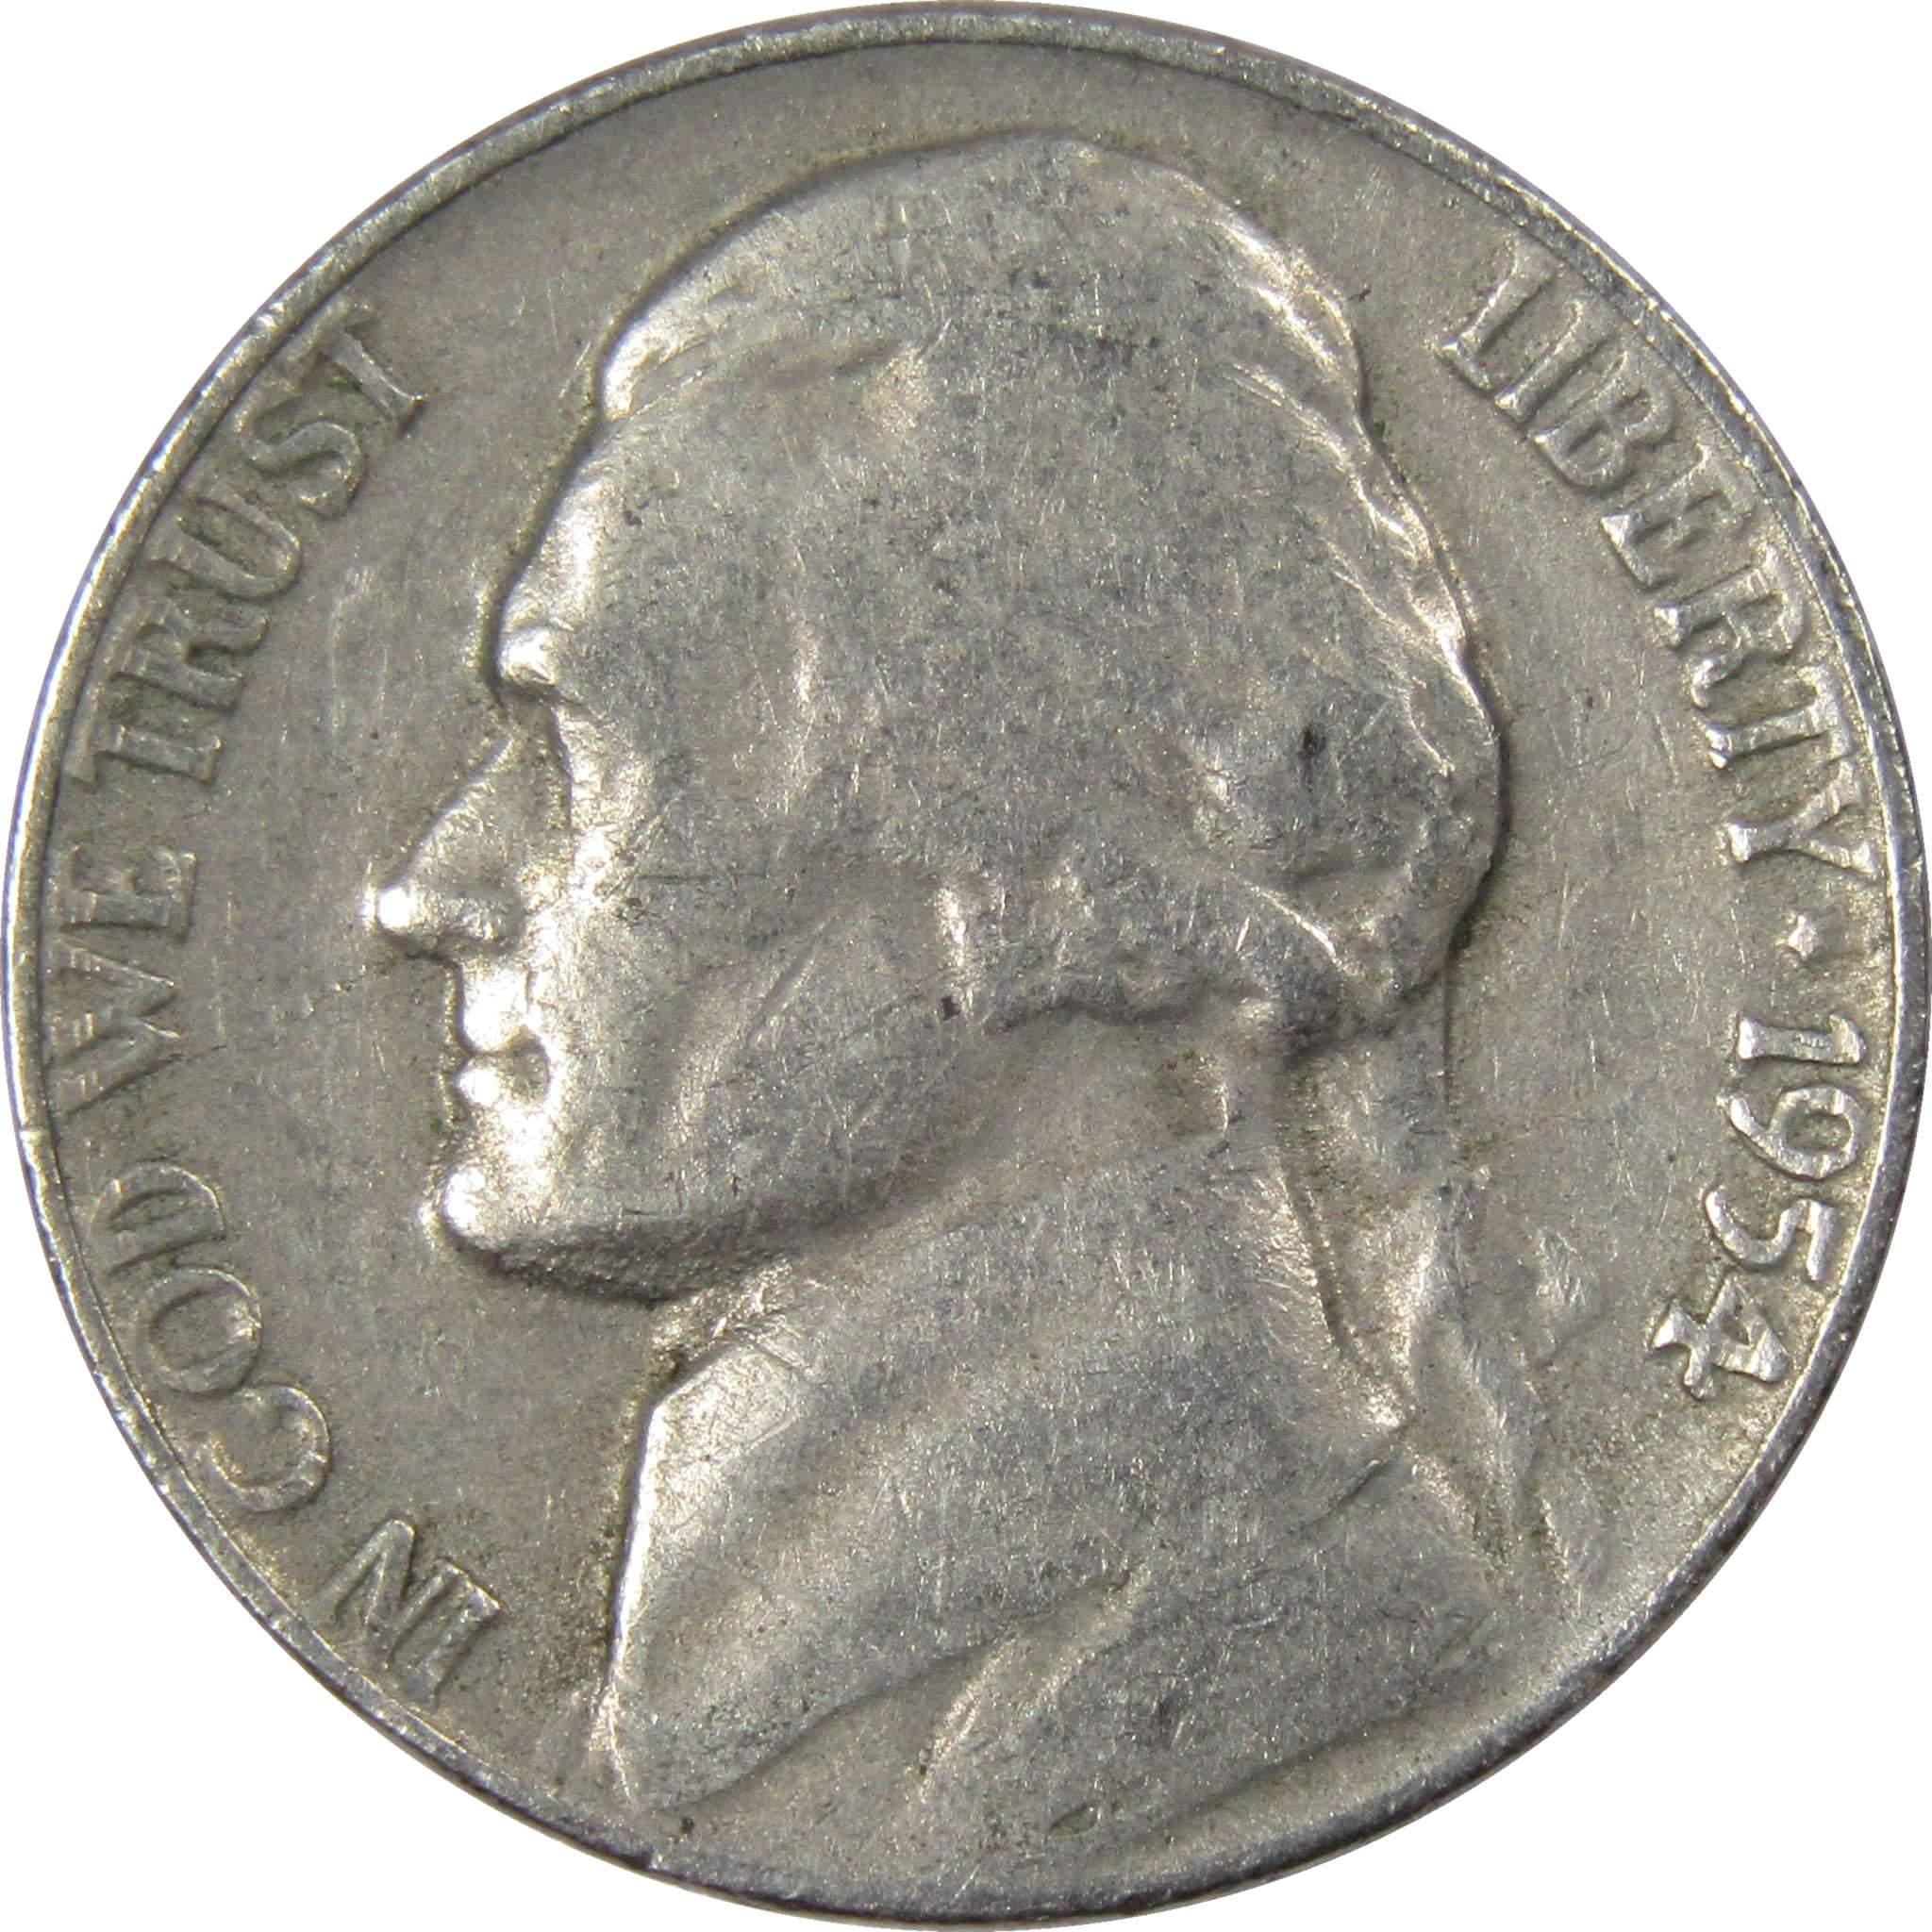 1954 Jefferson Nickel 5 Cent Piece AG About Good 5c US Coin Collectible